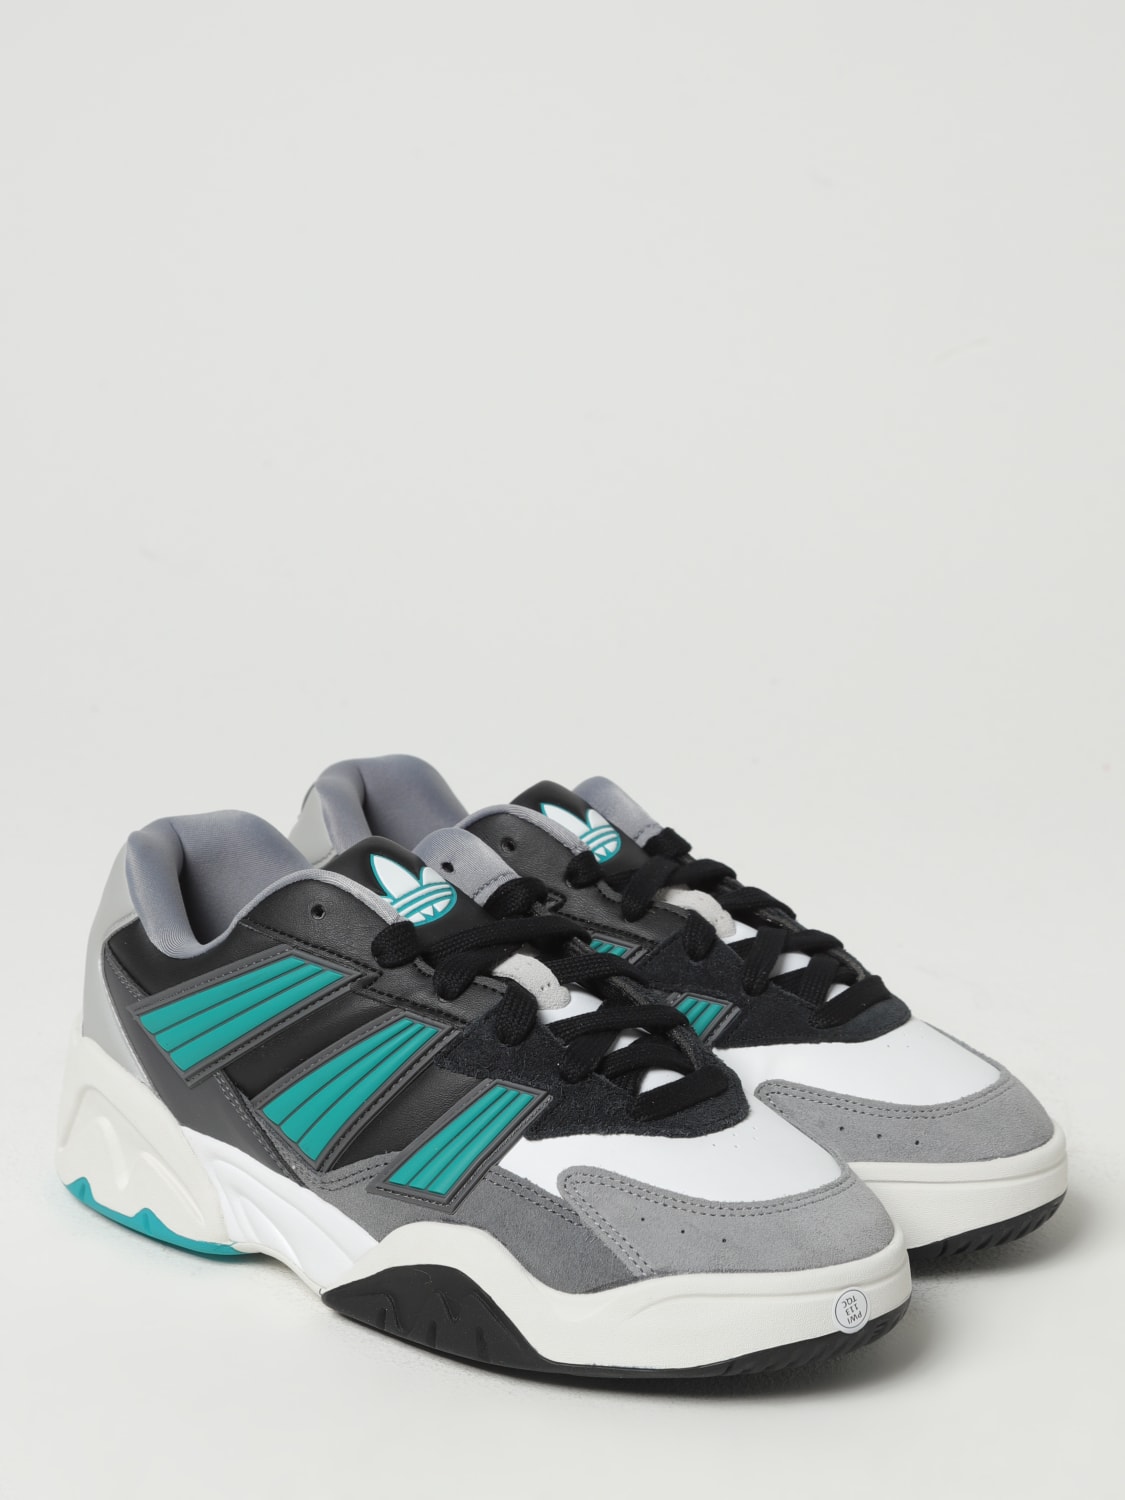 ADIDAS ORIGINALS: Court Magnetic sneakers in leather and rubber - Grey | Adidas  Originals sneakers IF5378 online at